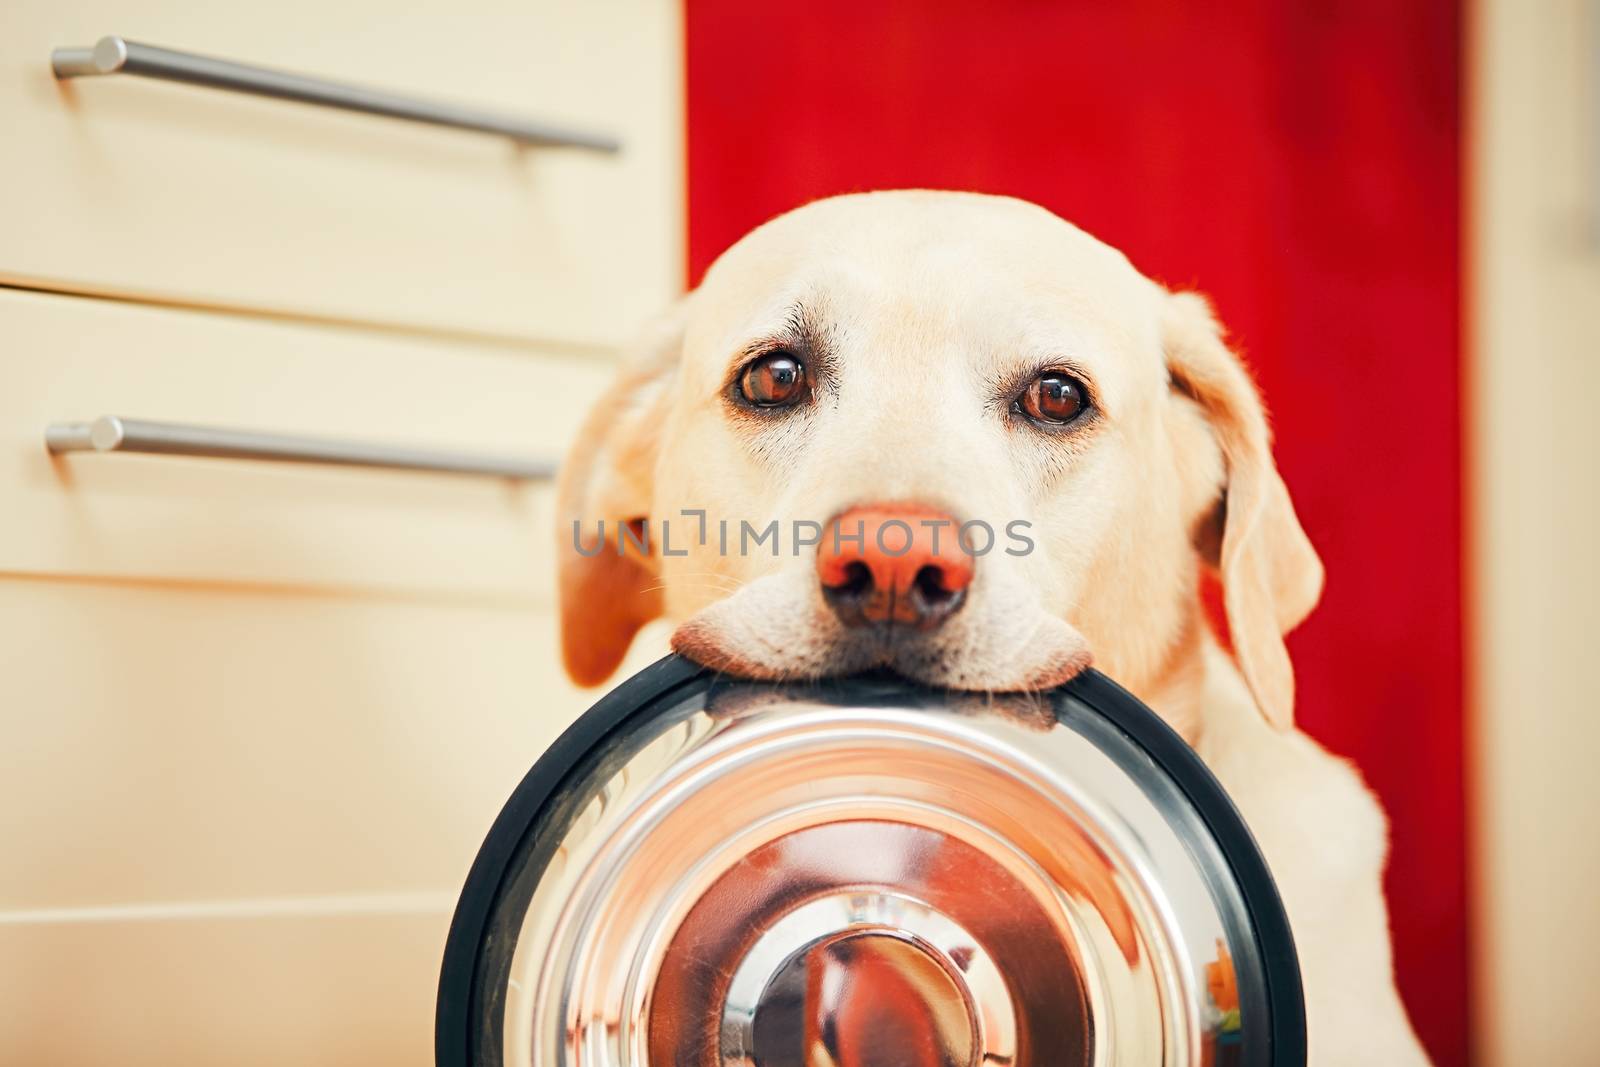 Domestic life with dog. Hungry dog with sad eyes is waiting for feeding in home kitchen. Adorable yellow labrador retriever is holding dog bowl in his mouth. 